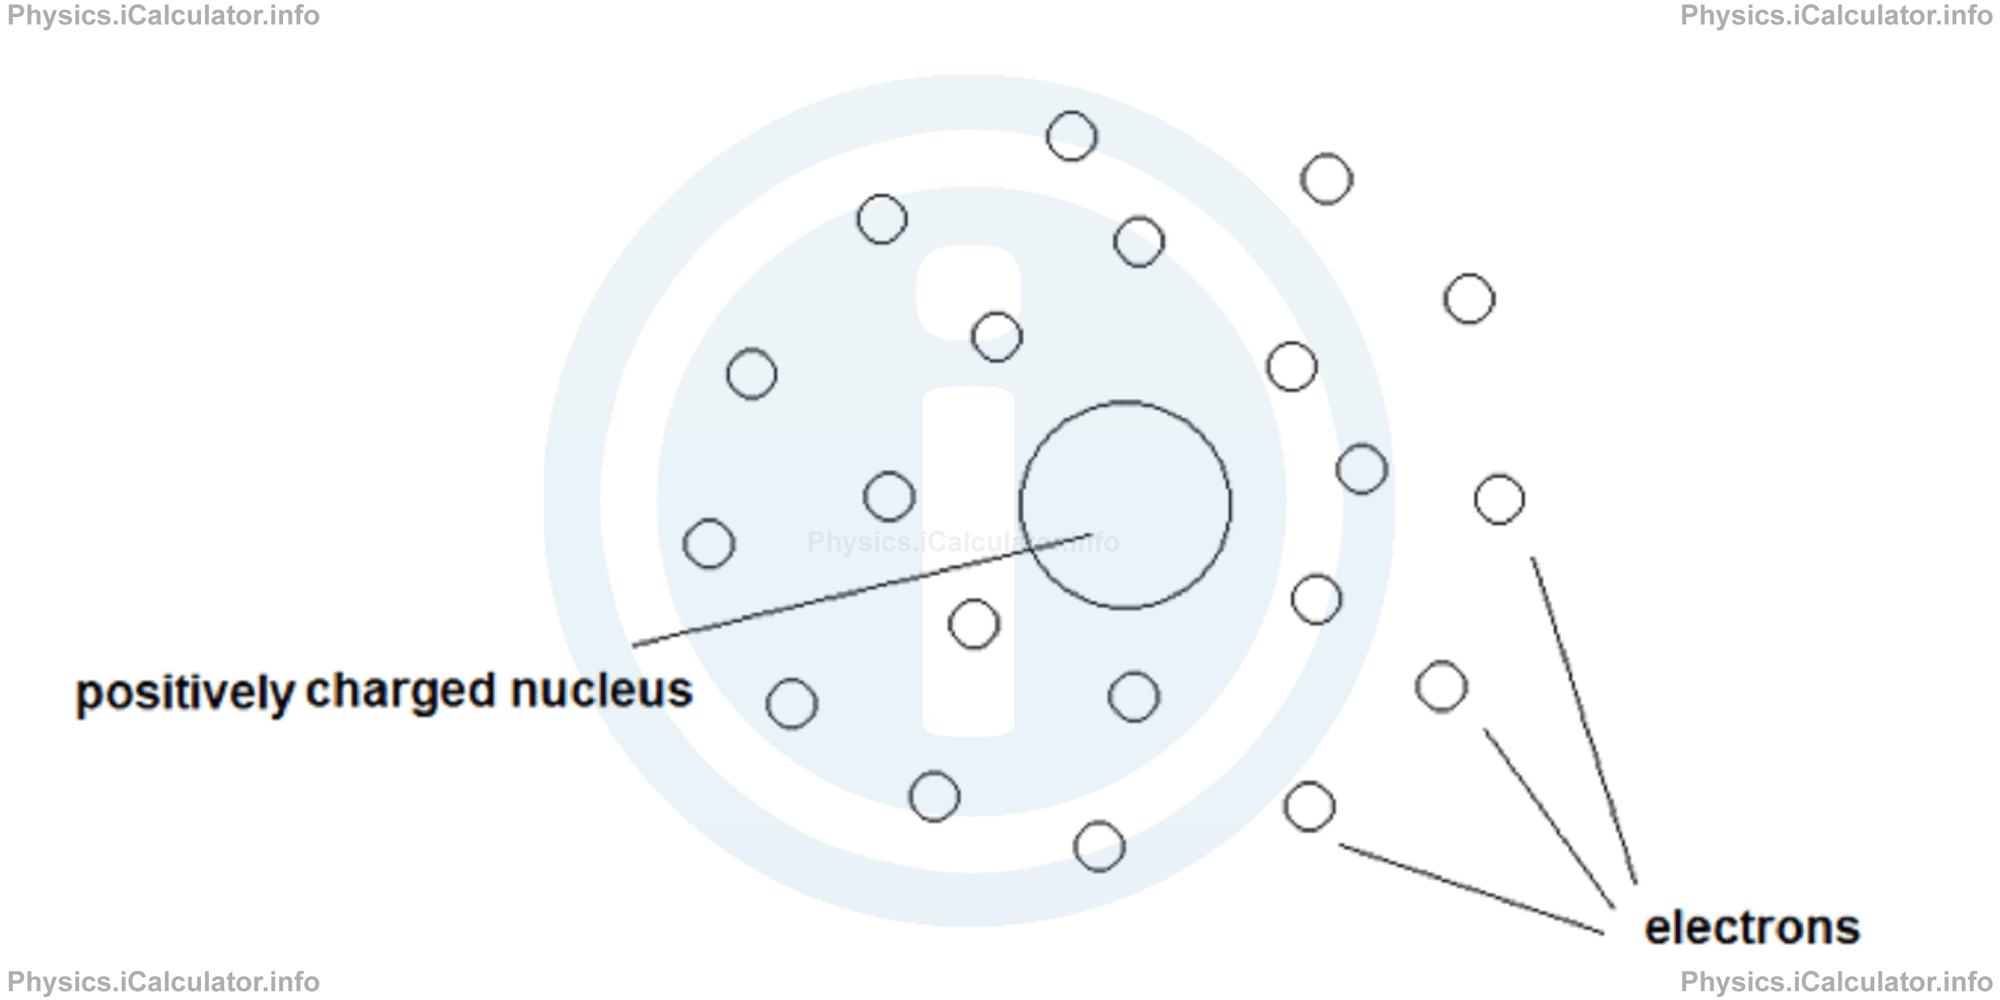 Physics Tutorials: This image provides visual information for the physics tutorial Atomic Nucleus and Its Structural Properties 